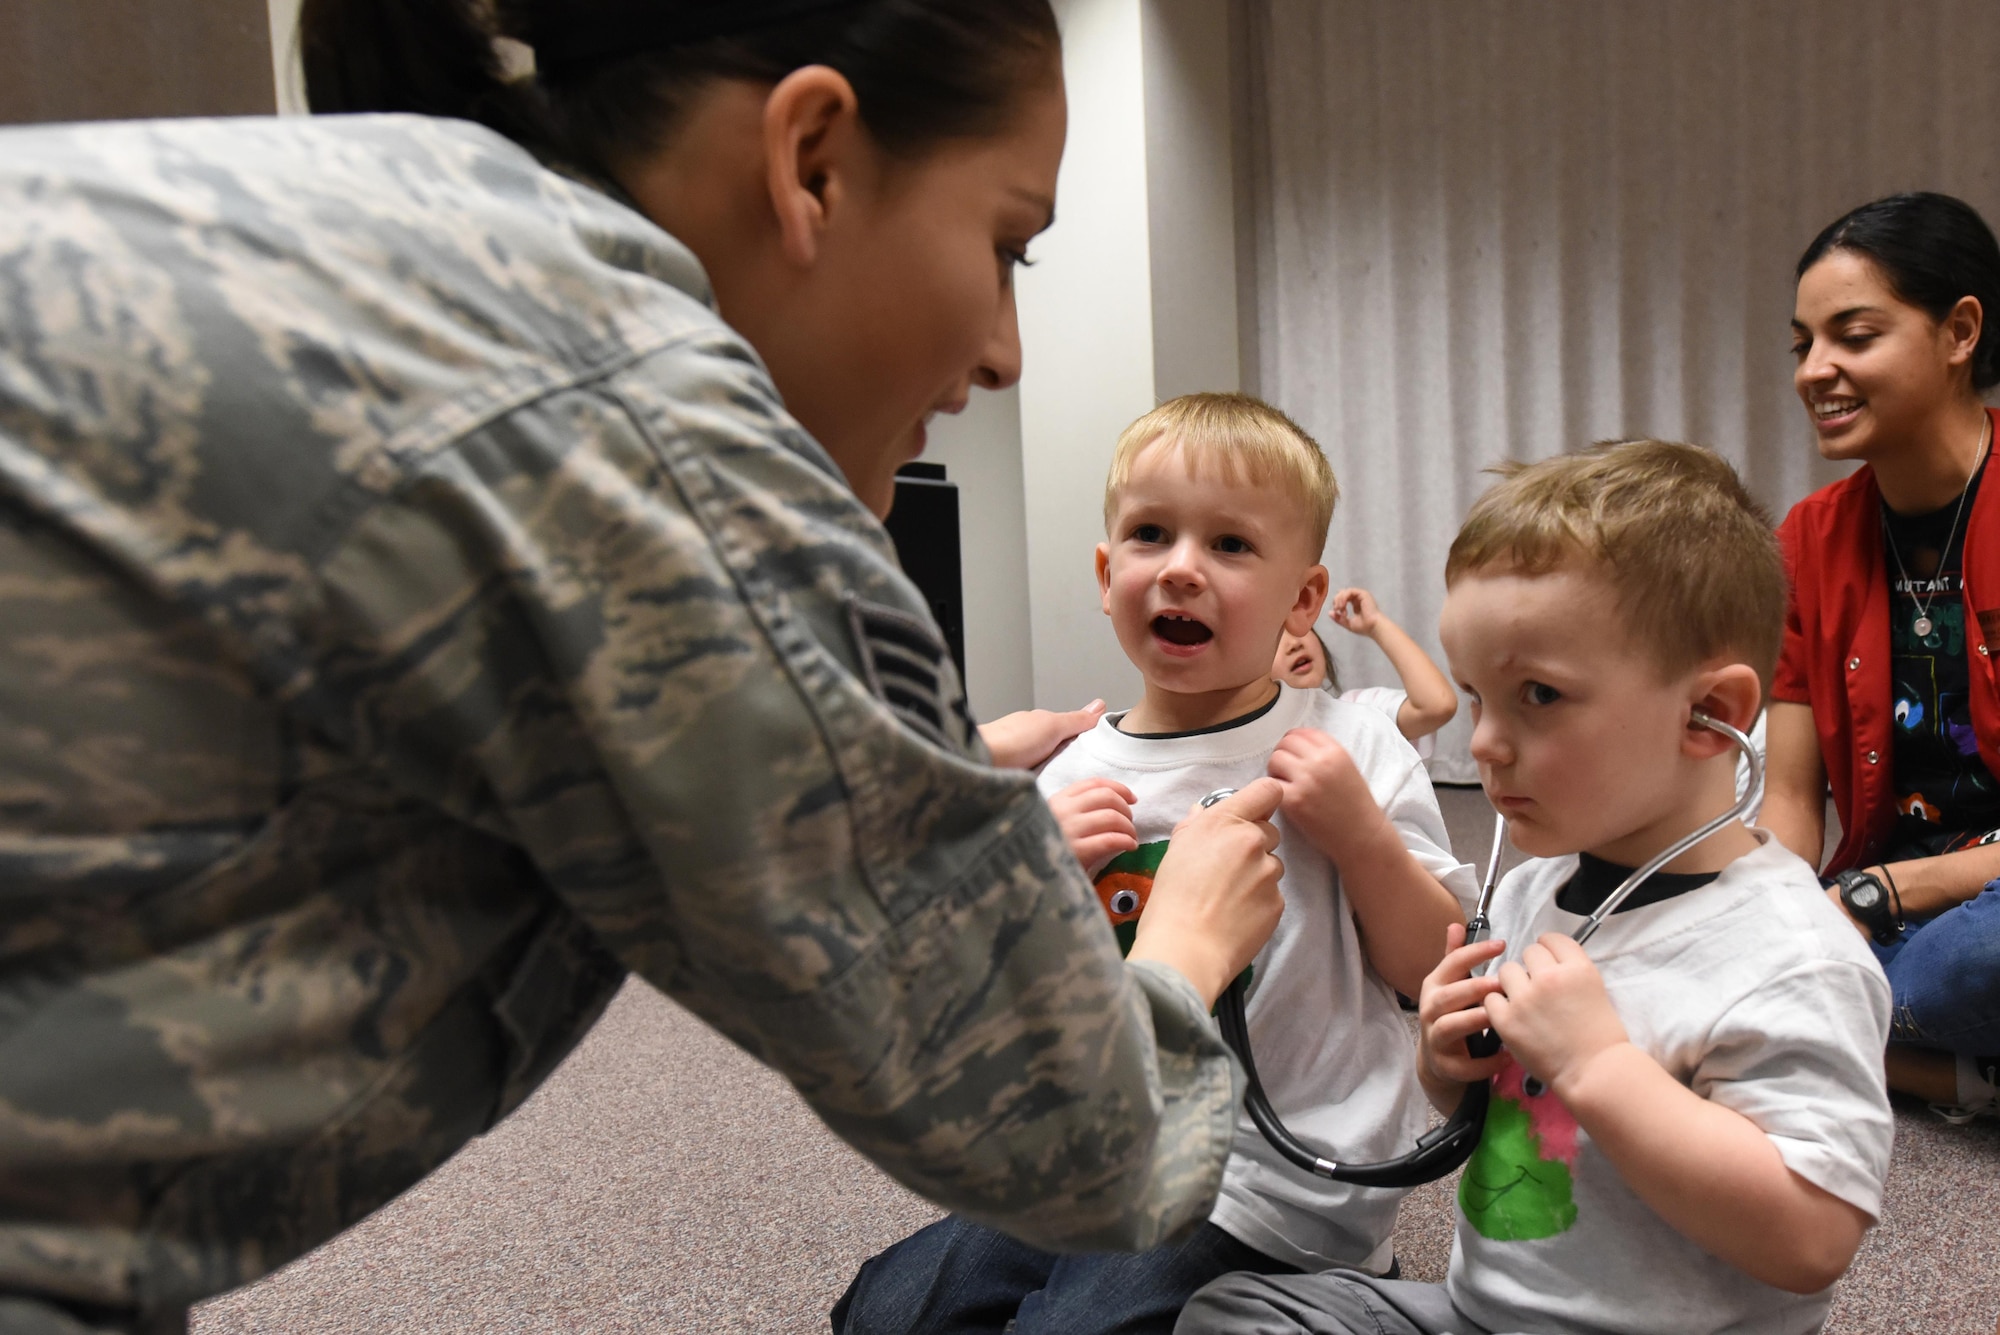 Senior Airman Elenacorozal  Denny, 4th Medical Operations Squadron medical technician, teaches children from the 4th Force Support Squadron Child Development Center how to use a stethoscope, March 21, 2017, at Seymour Johnson Air Force Base, North Carolina. The children listened to each other’s heartbeats, read books about the body and toured the pediatric clinic. (U.S. Air Force photo by Airman 1st Class Victoria Boyton)